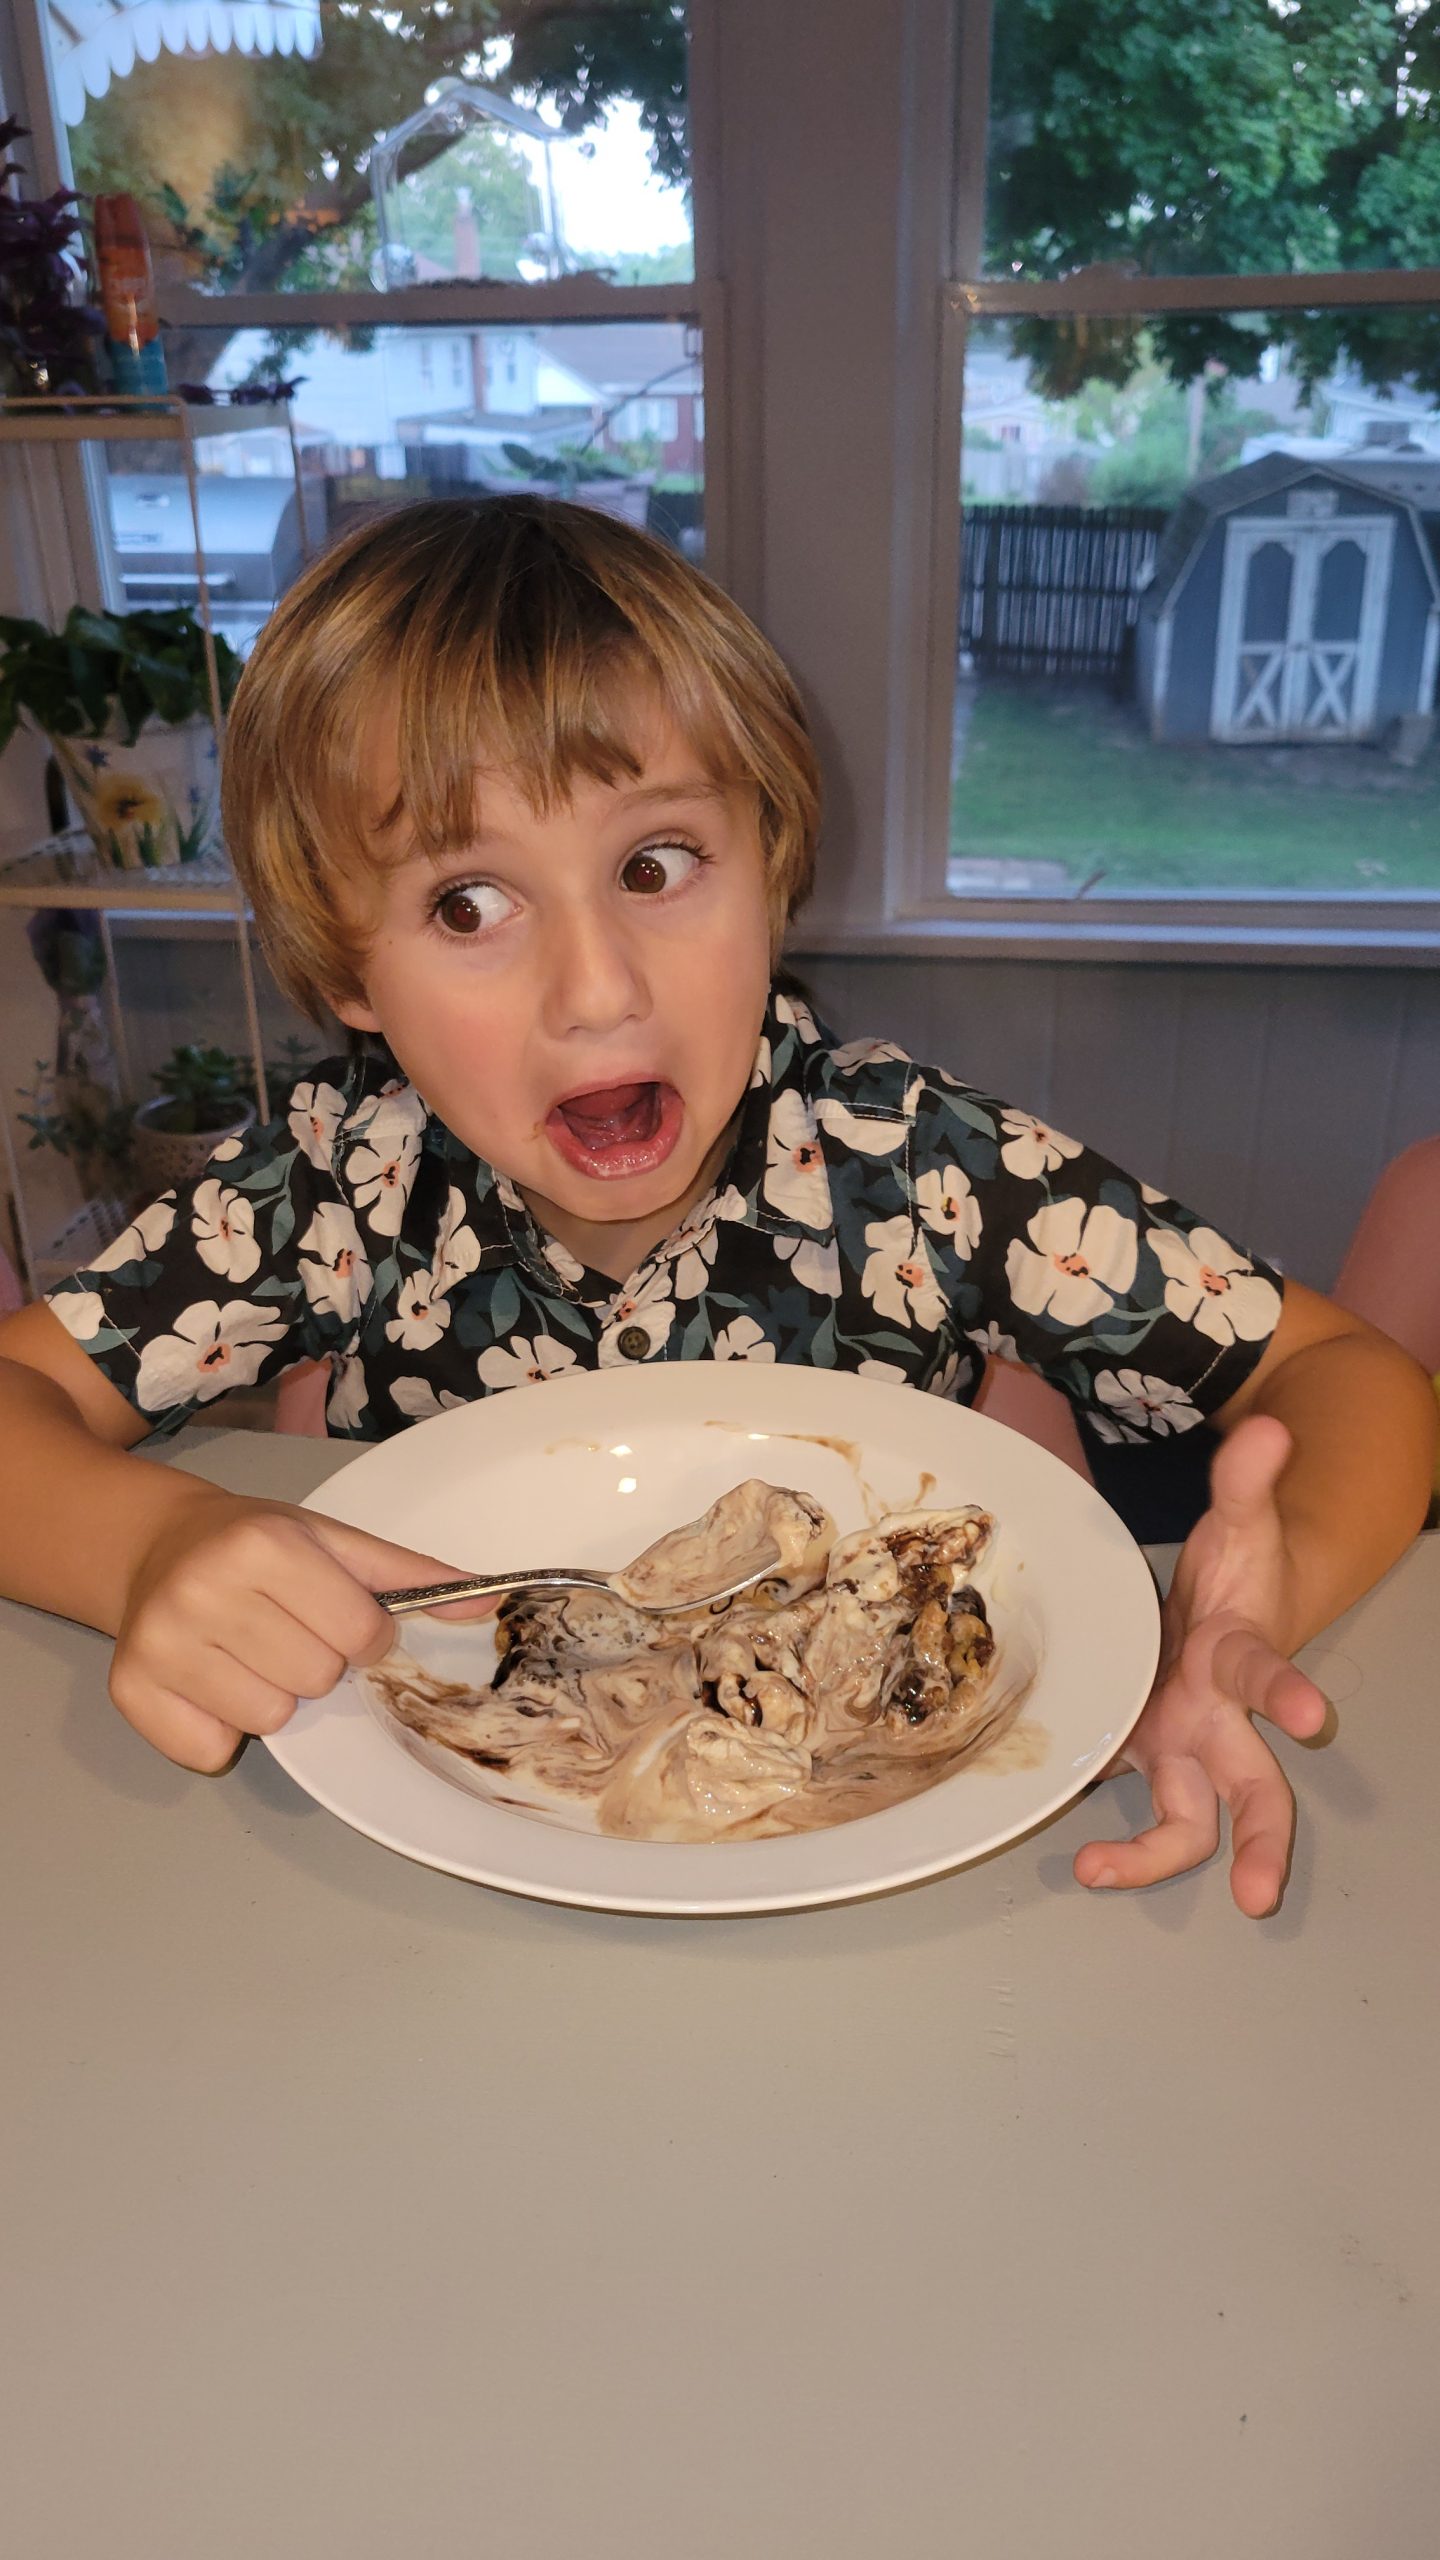 a boy making a silly face as he eats a bowl of ice cream